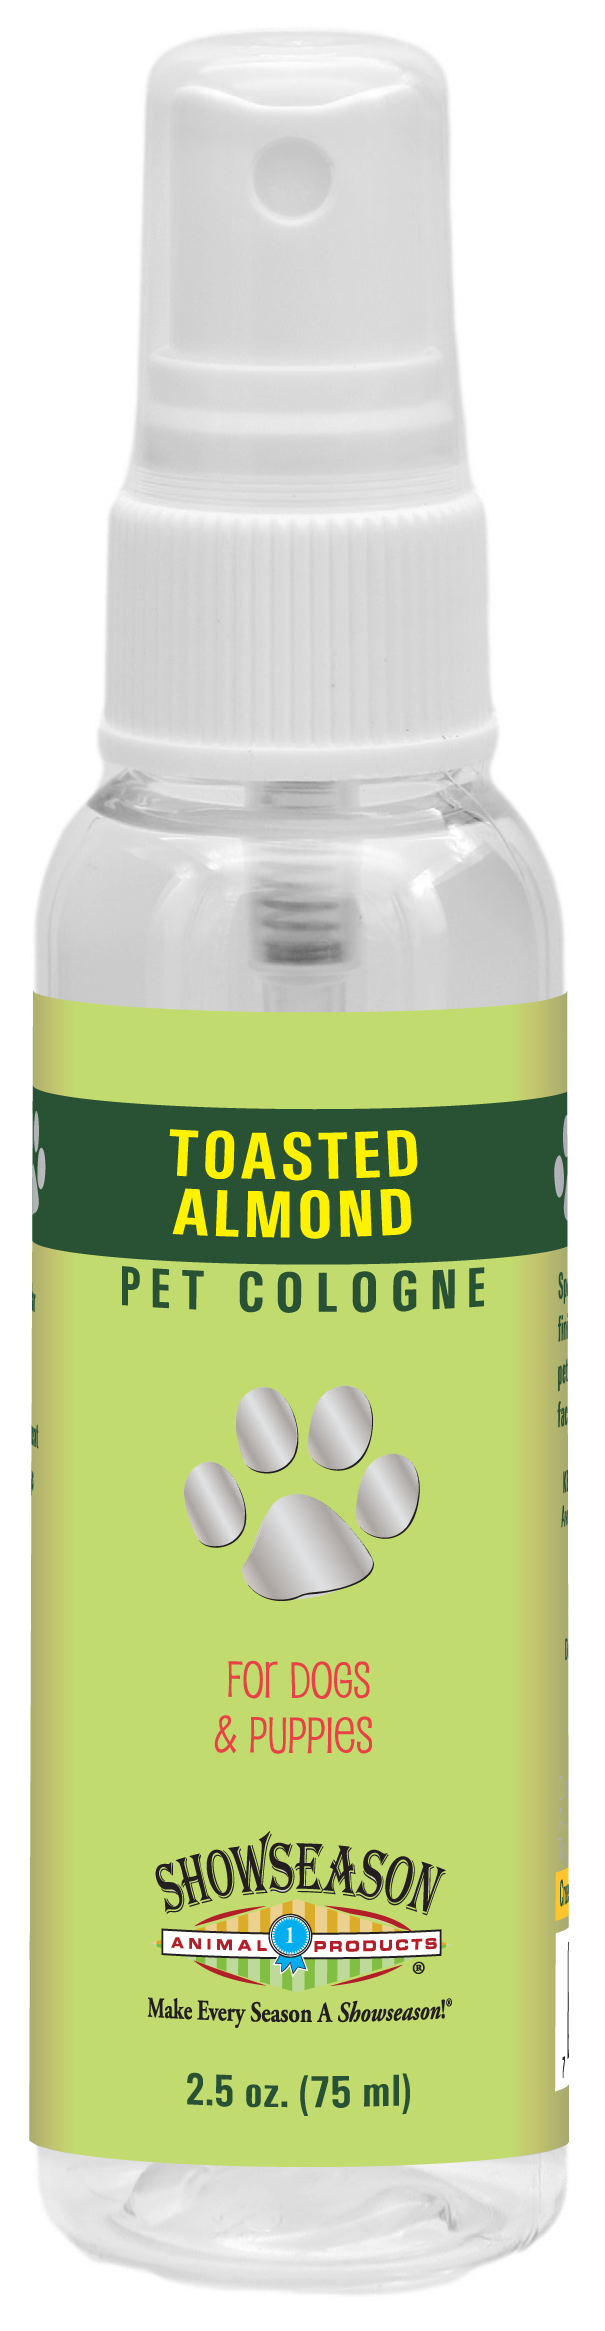 Toasted Almond Pet Cologne